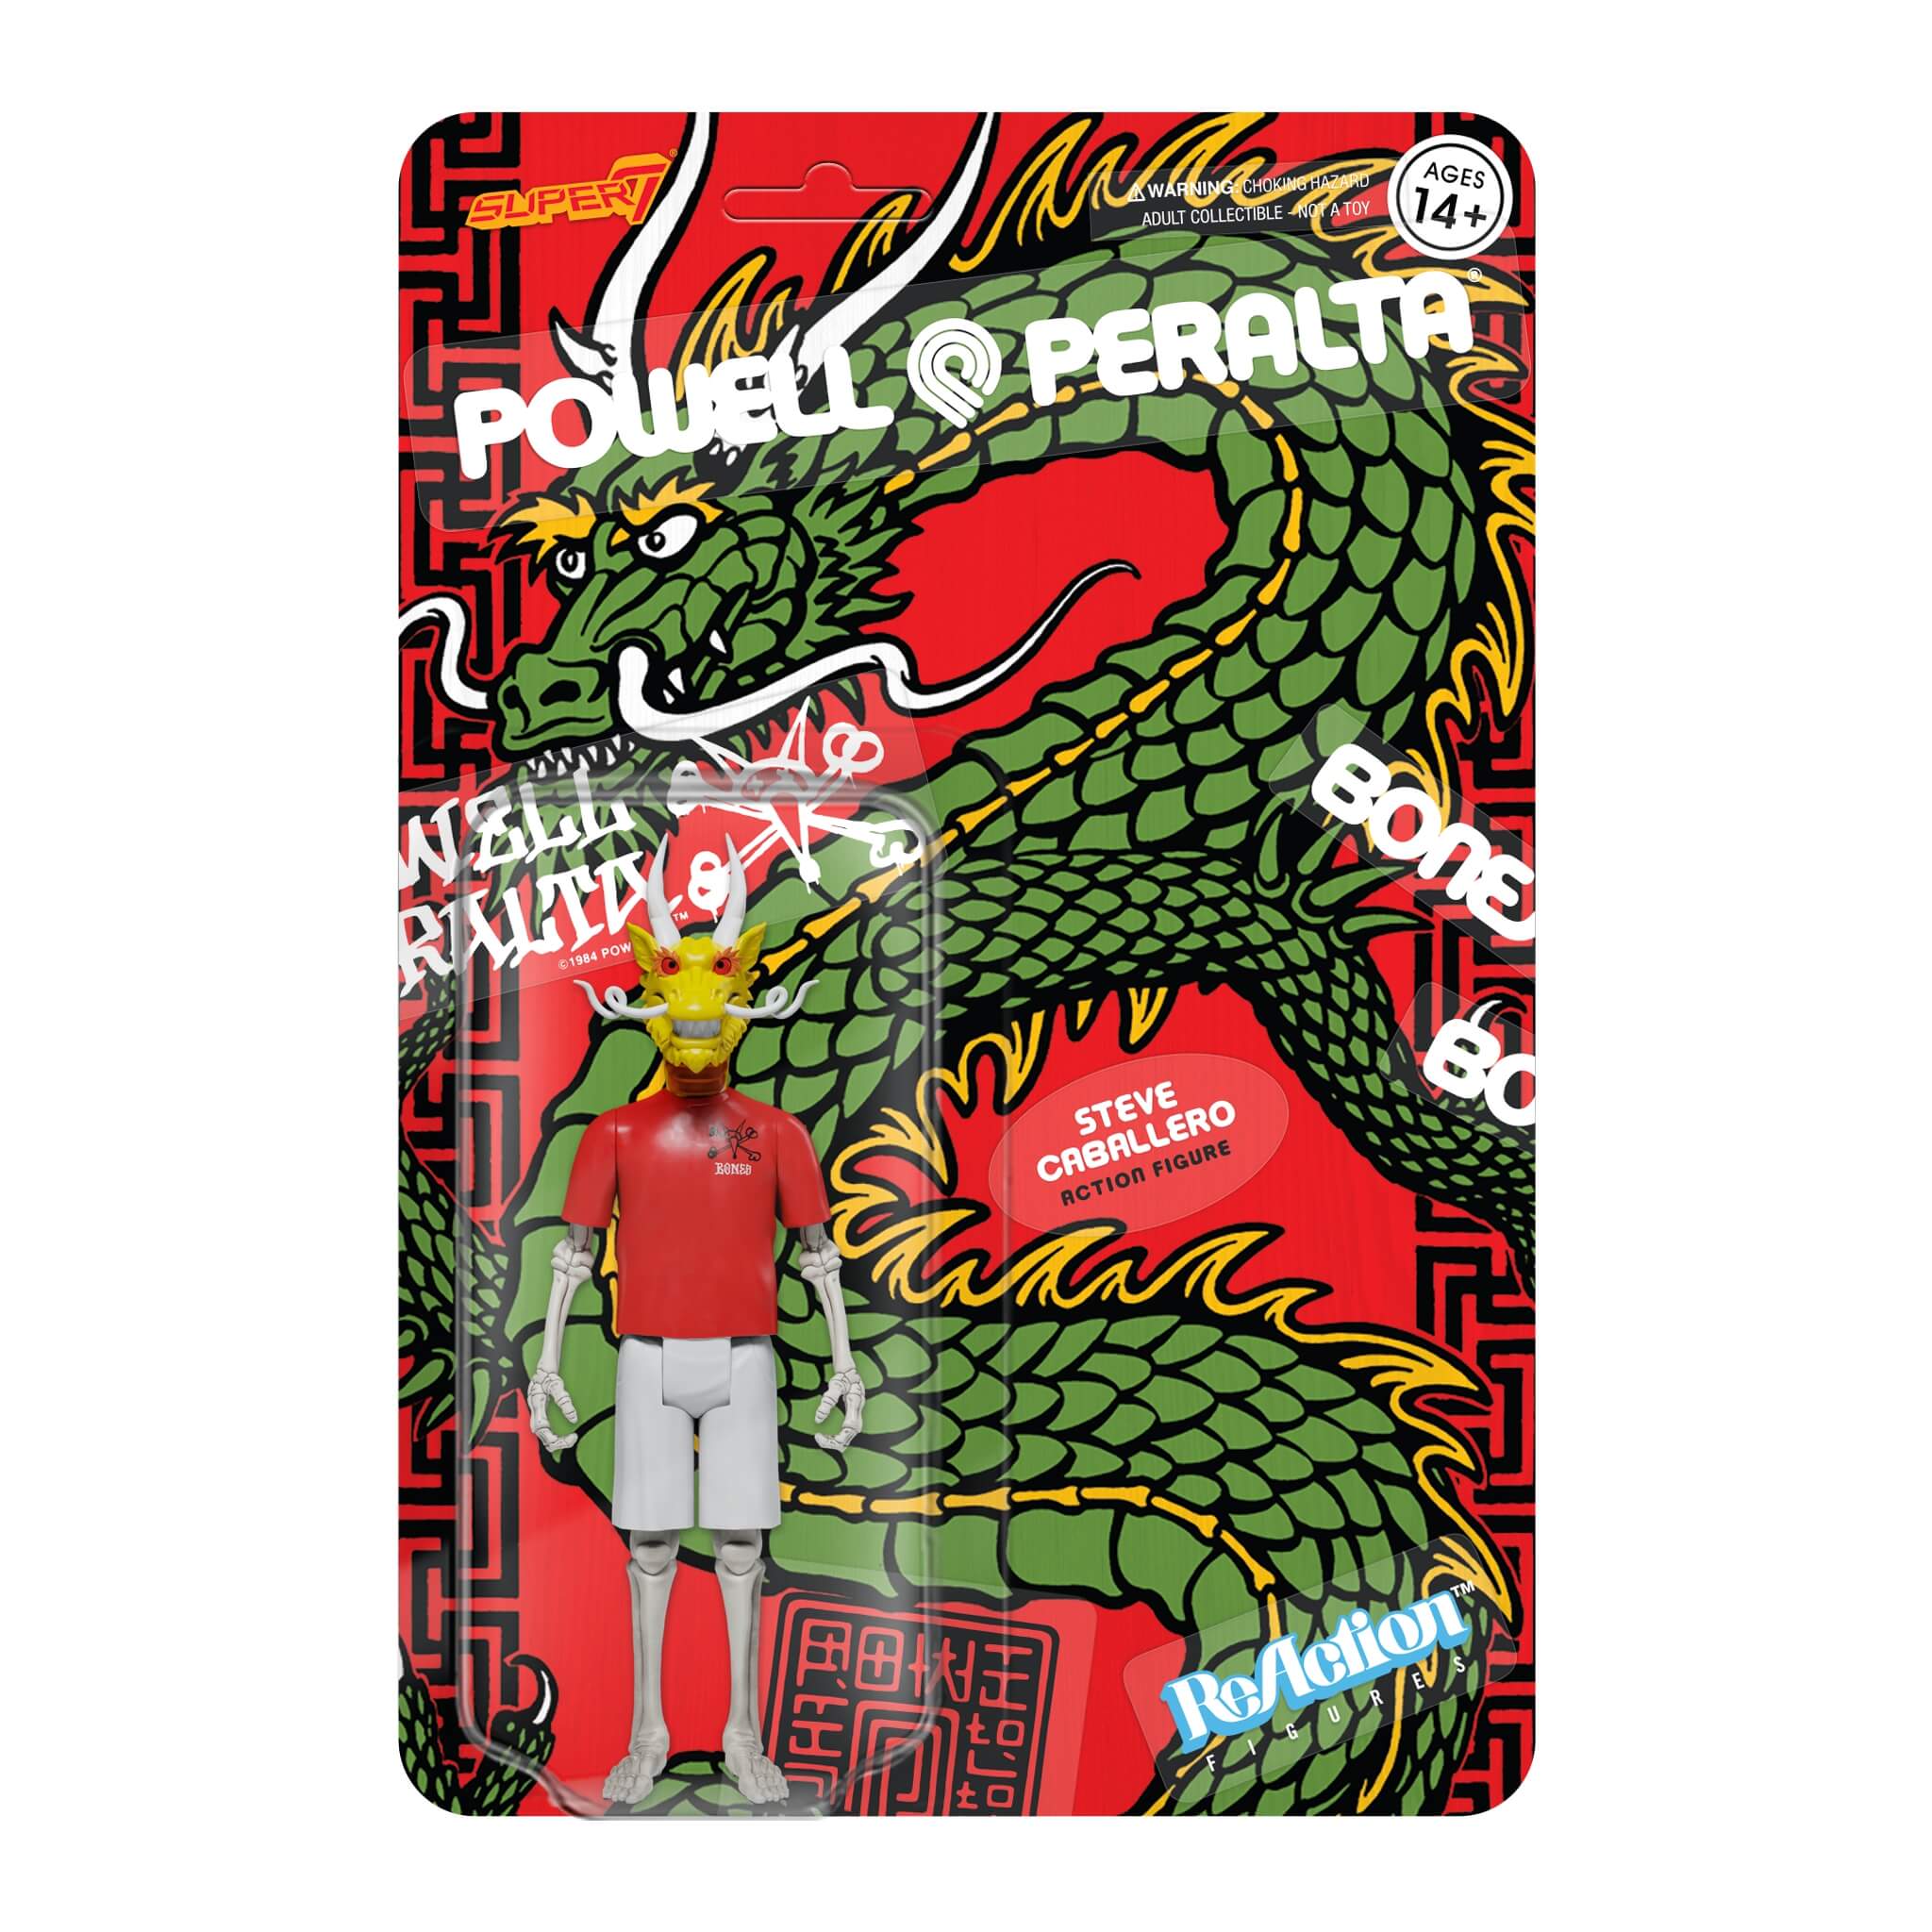 Powell-Peralta ReAction Figure Wave 1 - Steve Caballero Chinese Dragon